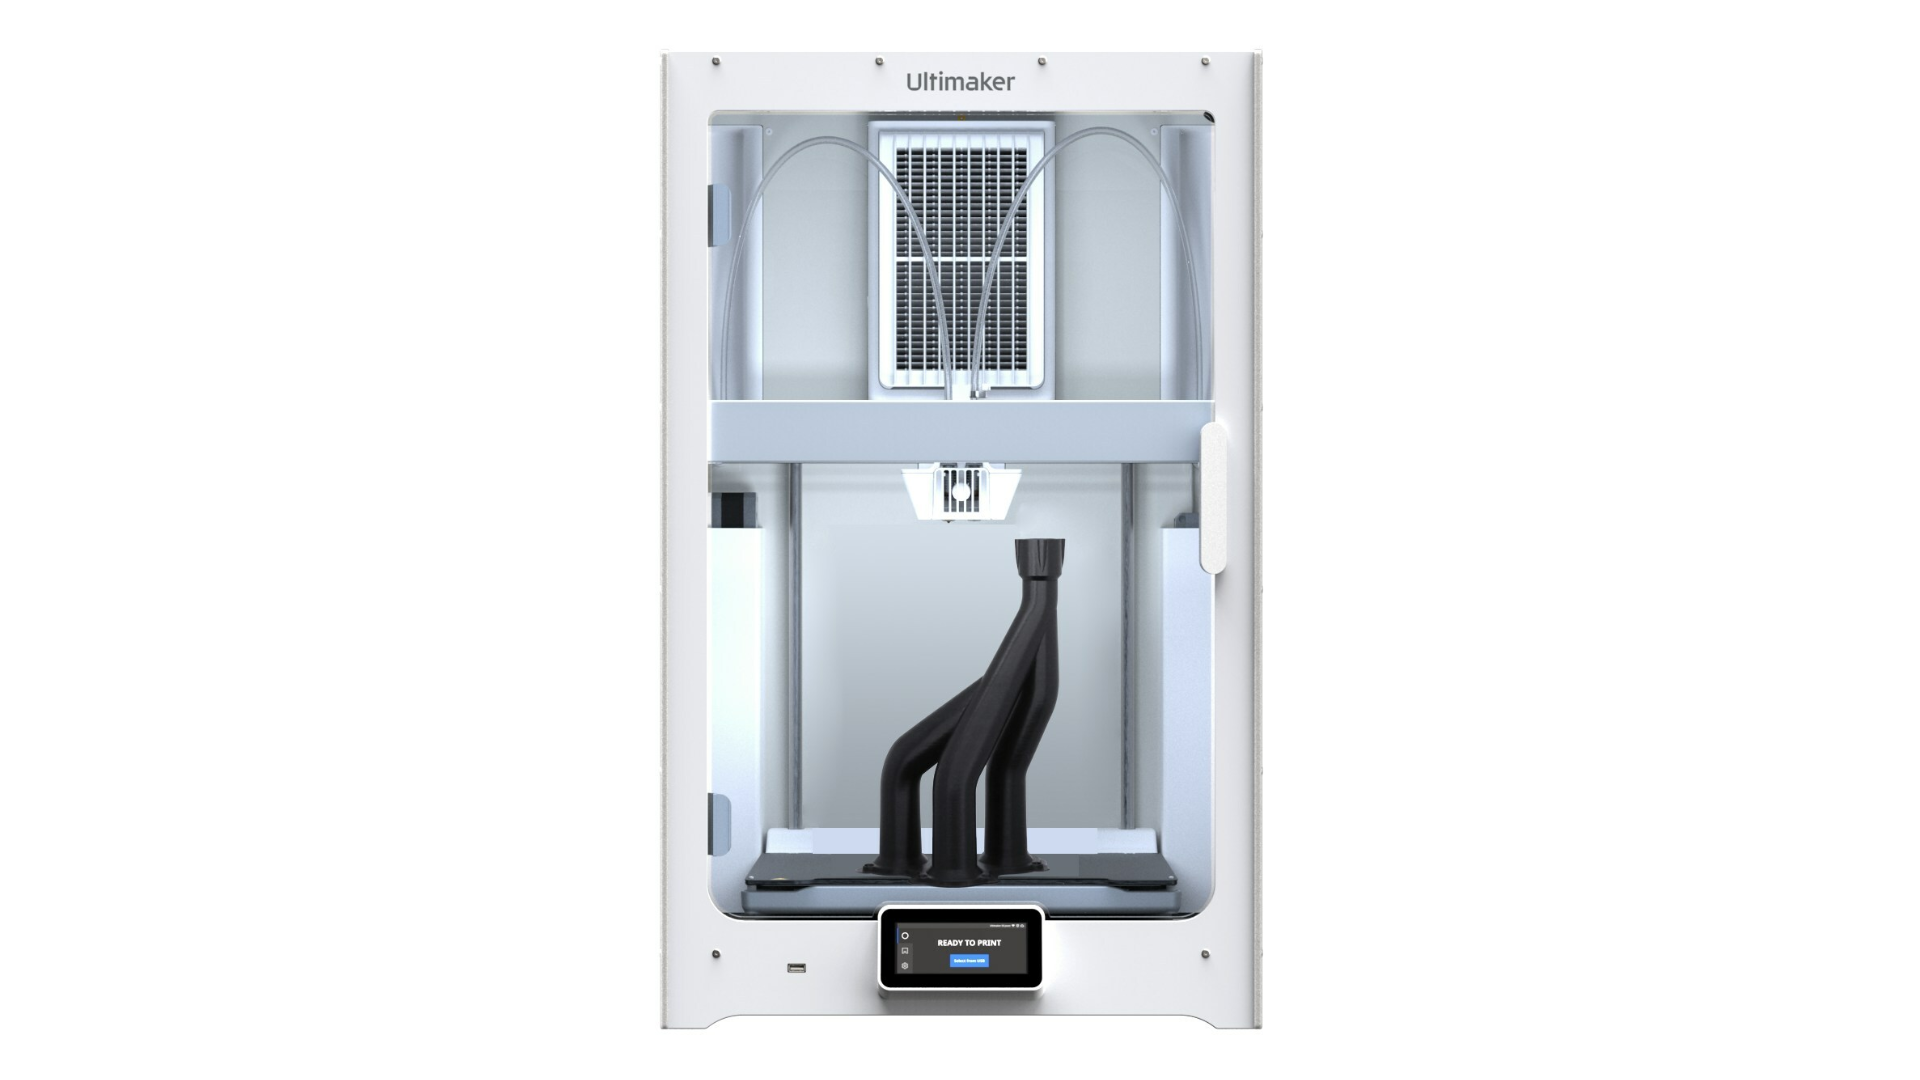 The UltiMaker S7 introduces a range of new features designed for ease of use and print reliability including automated bed leveling.